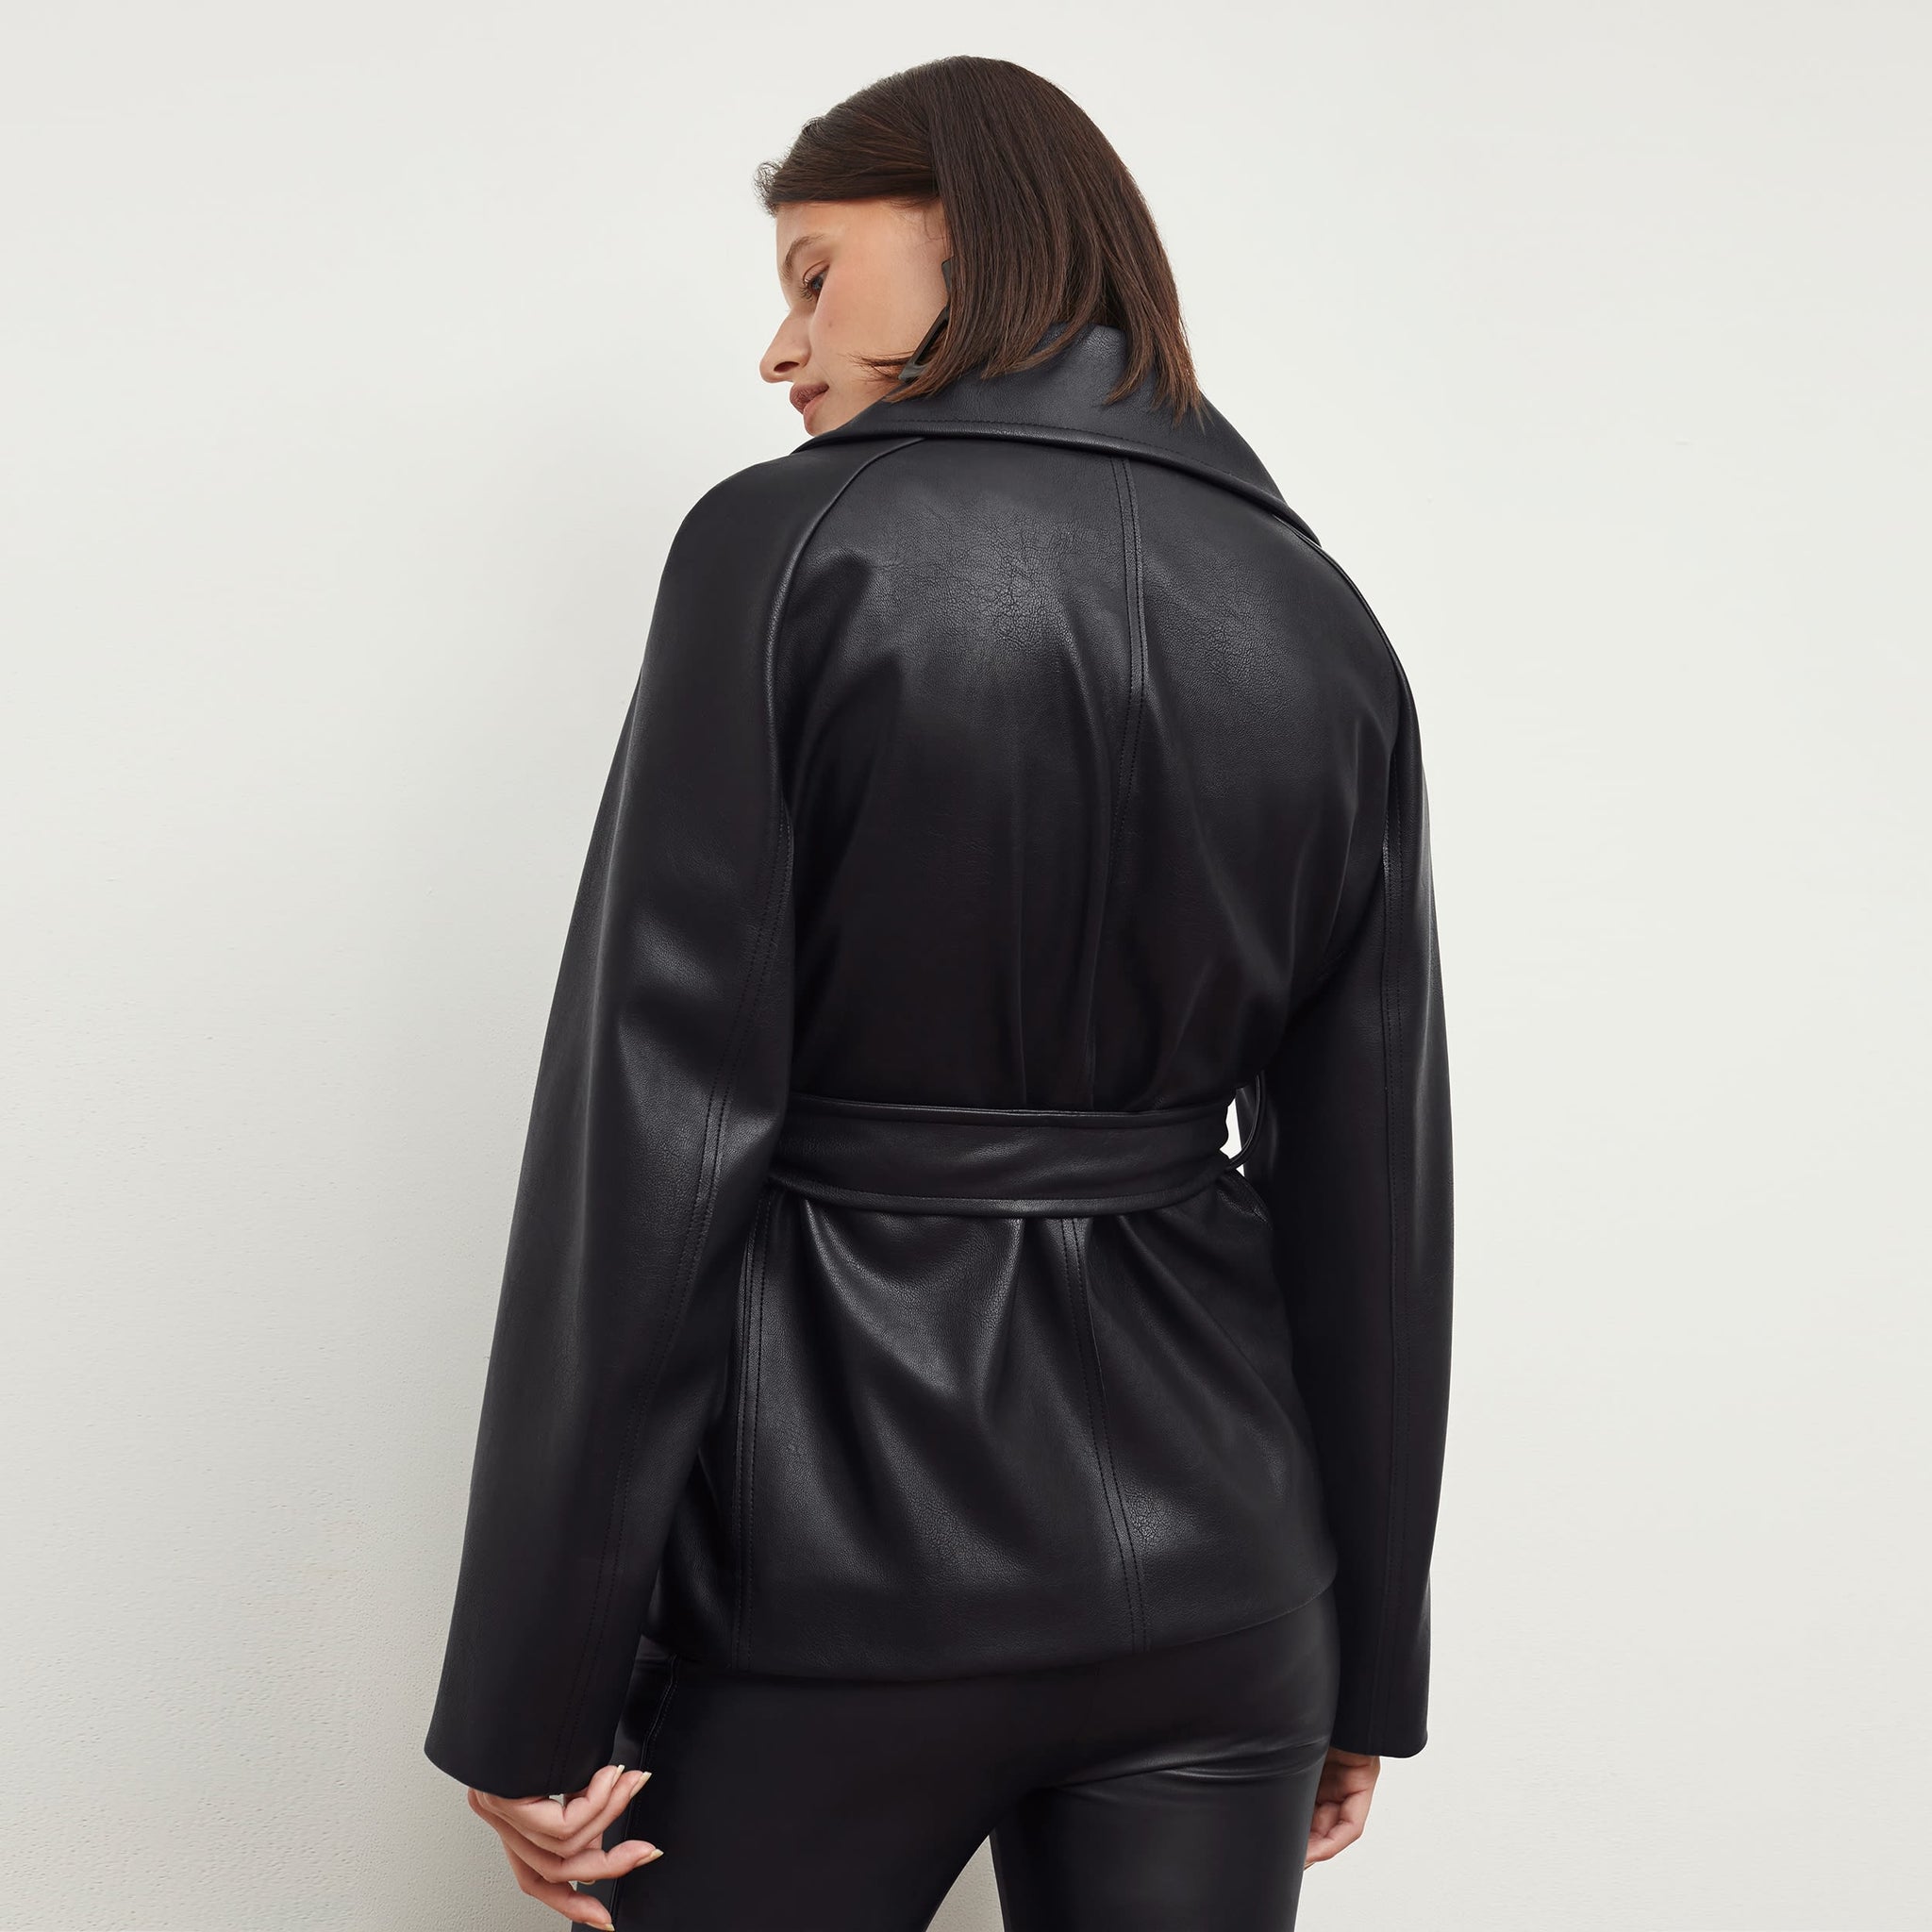 Back image of a woman standing wearing the Alphonso Jacket—Vegan Leather in Black